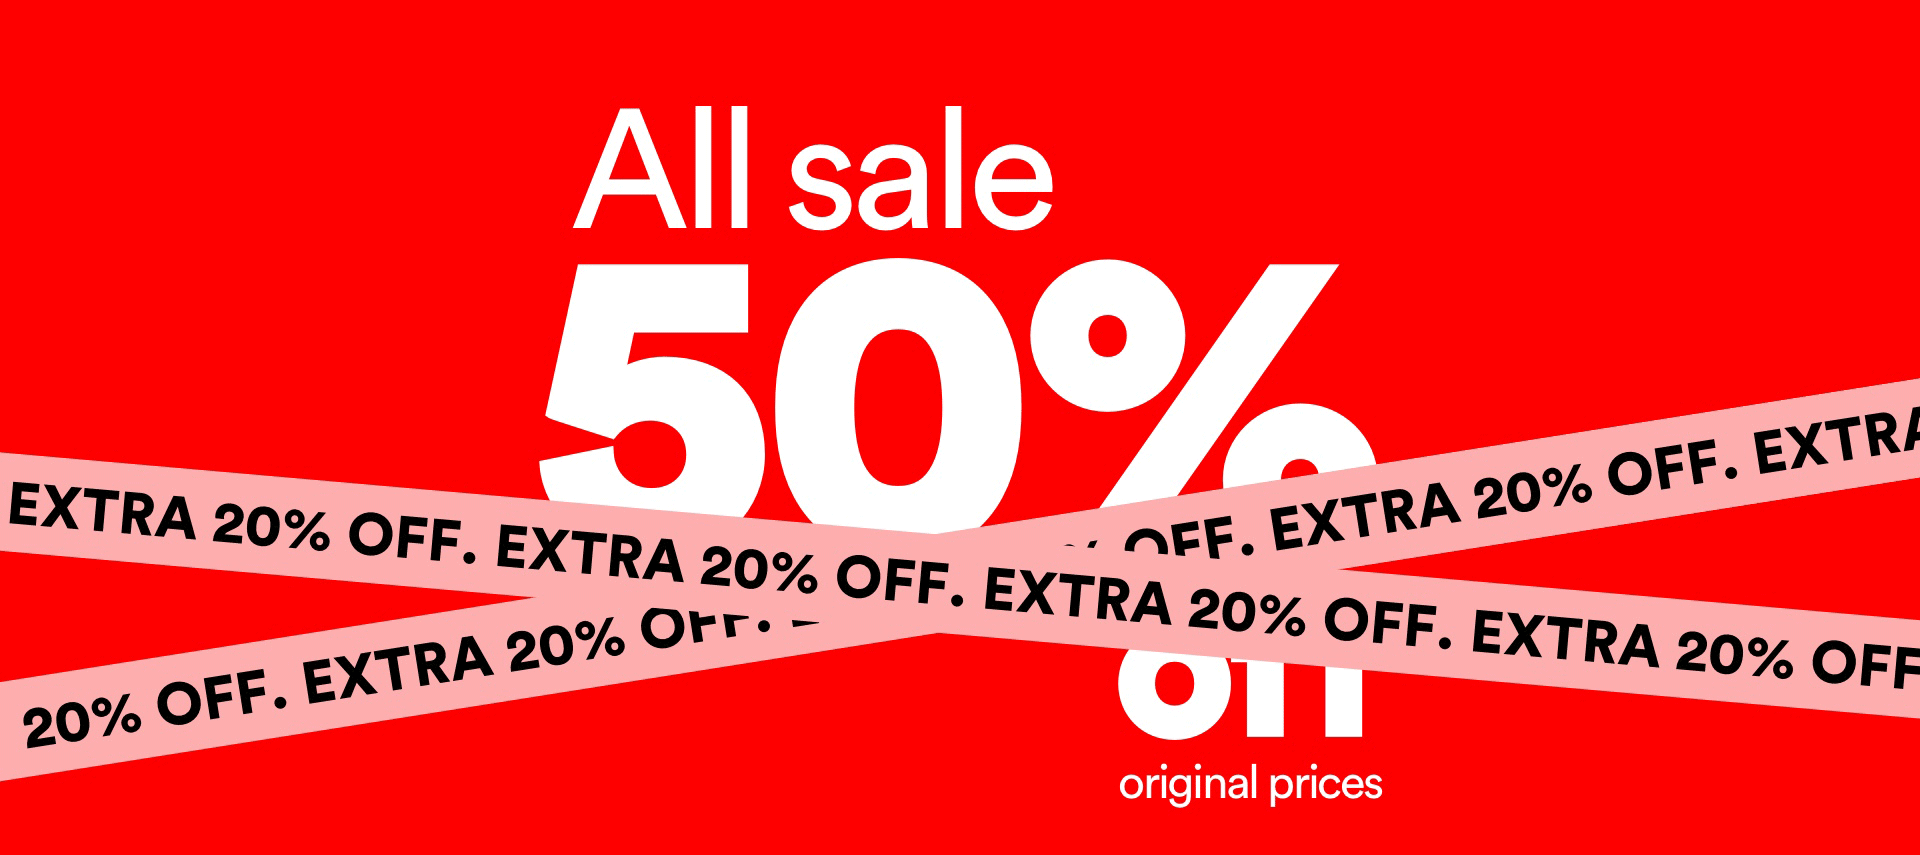 Cotton On 50% OFF + extra 20% OFF with coupon on all sale styles for men, women, kids, accessories